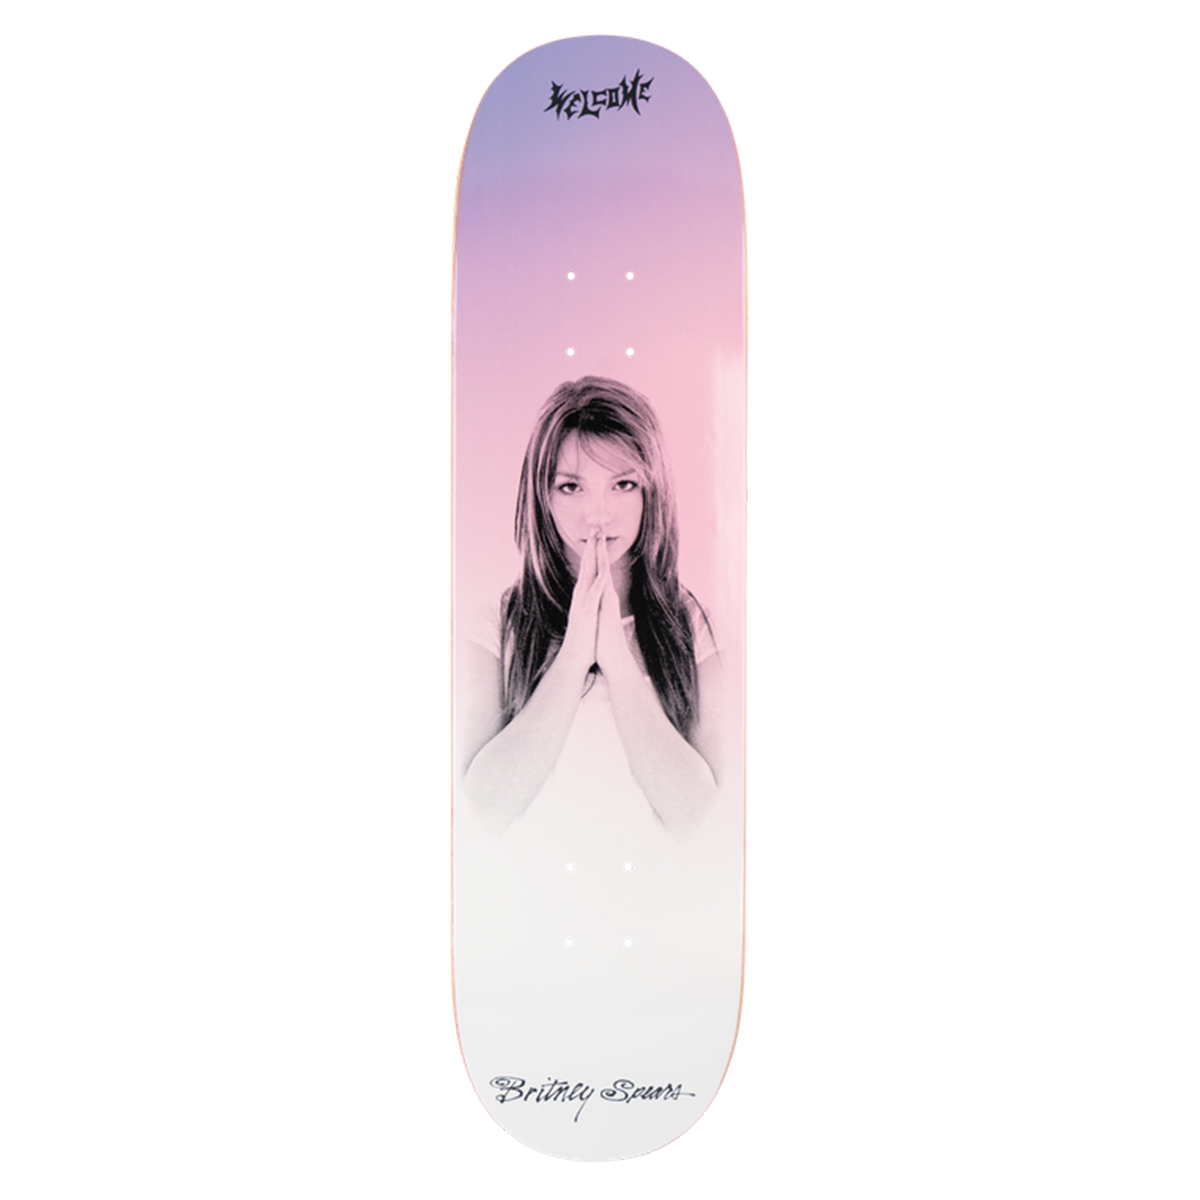 Welcome x Britney Believe Skate Deck - Assorted Sizes